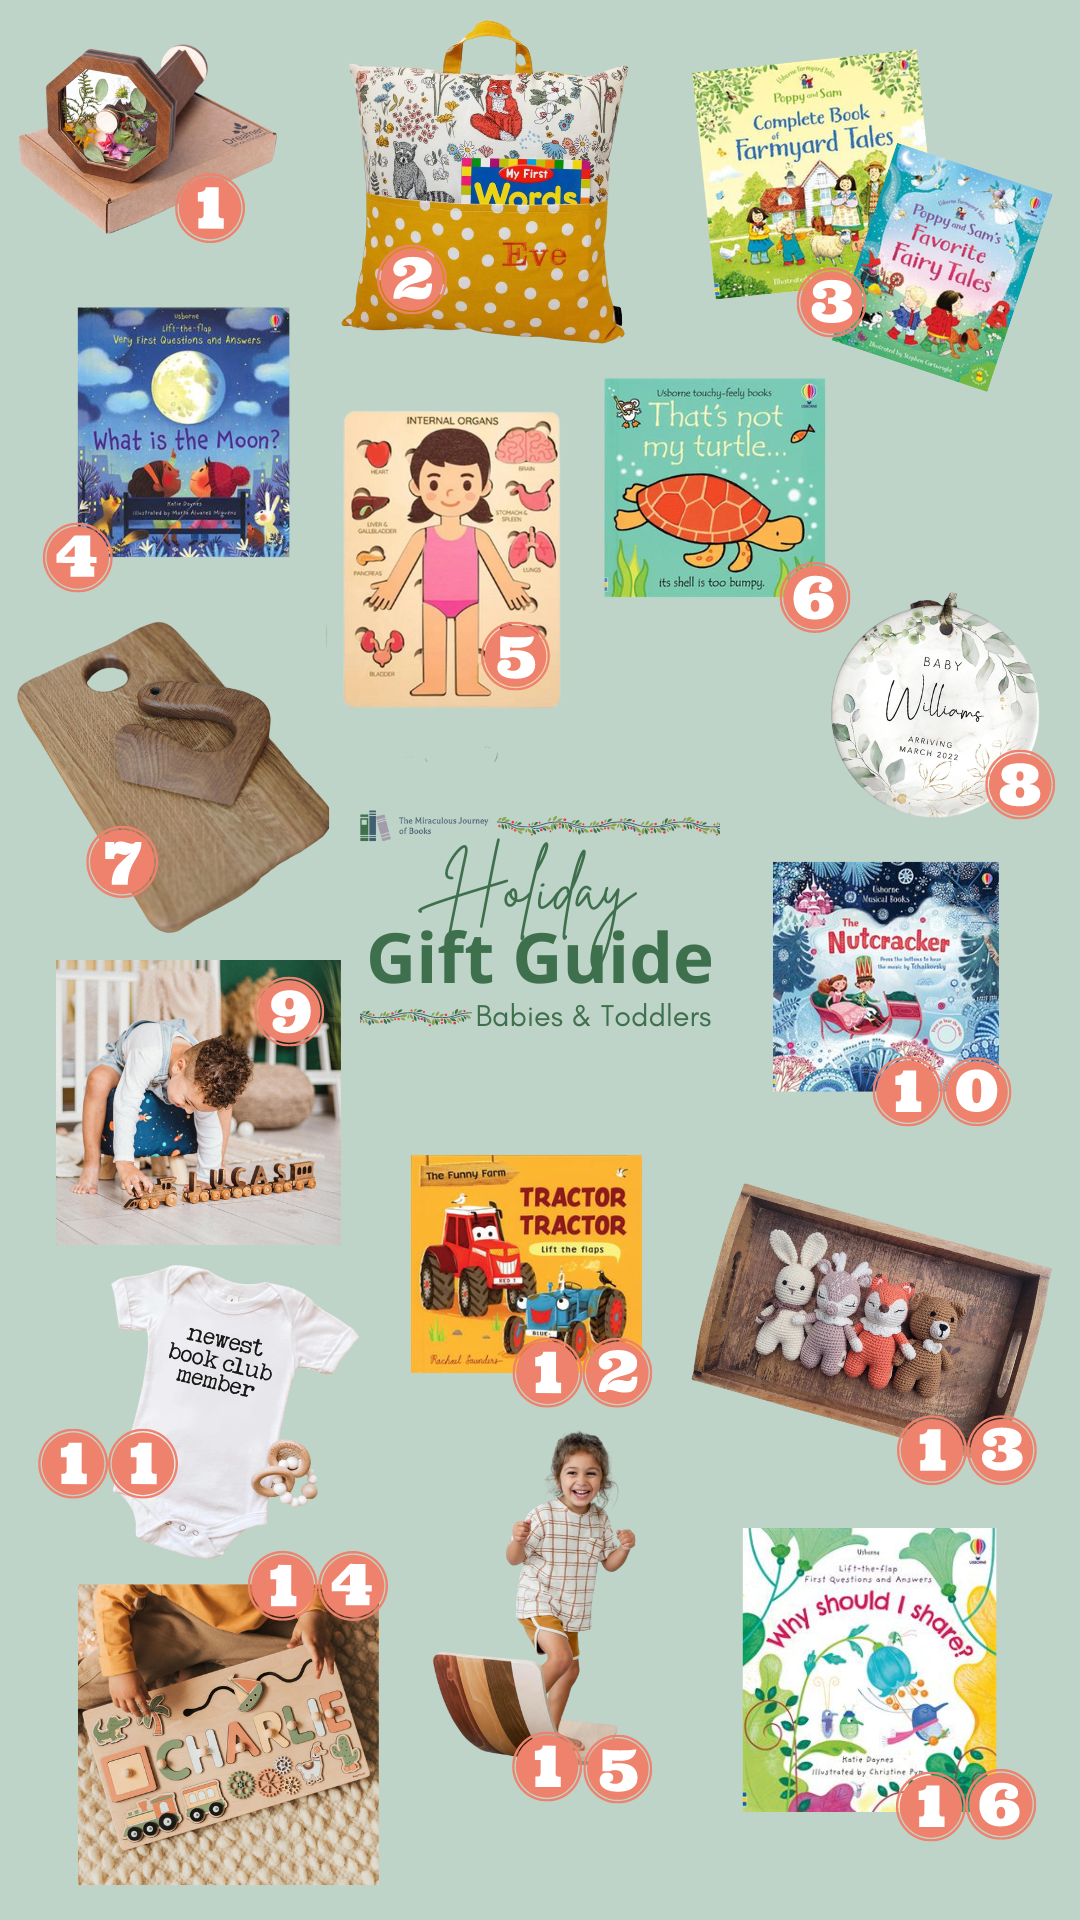 Holiday Gift Guide for Babies and Toddlers. Image includes 16 different gift items that are described in this post.